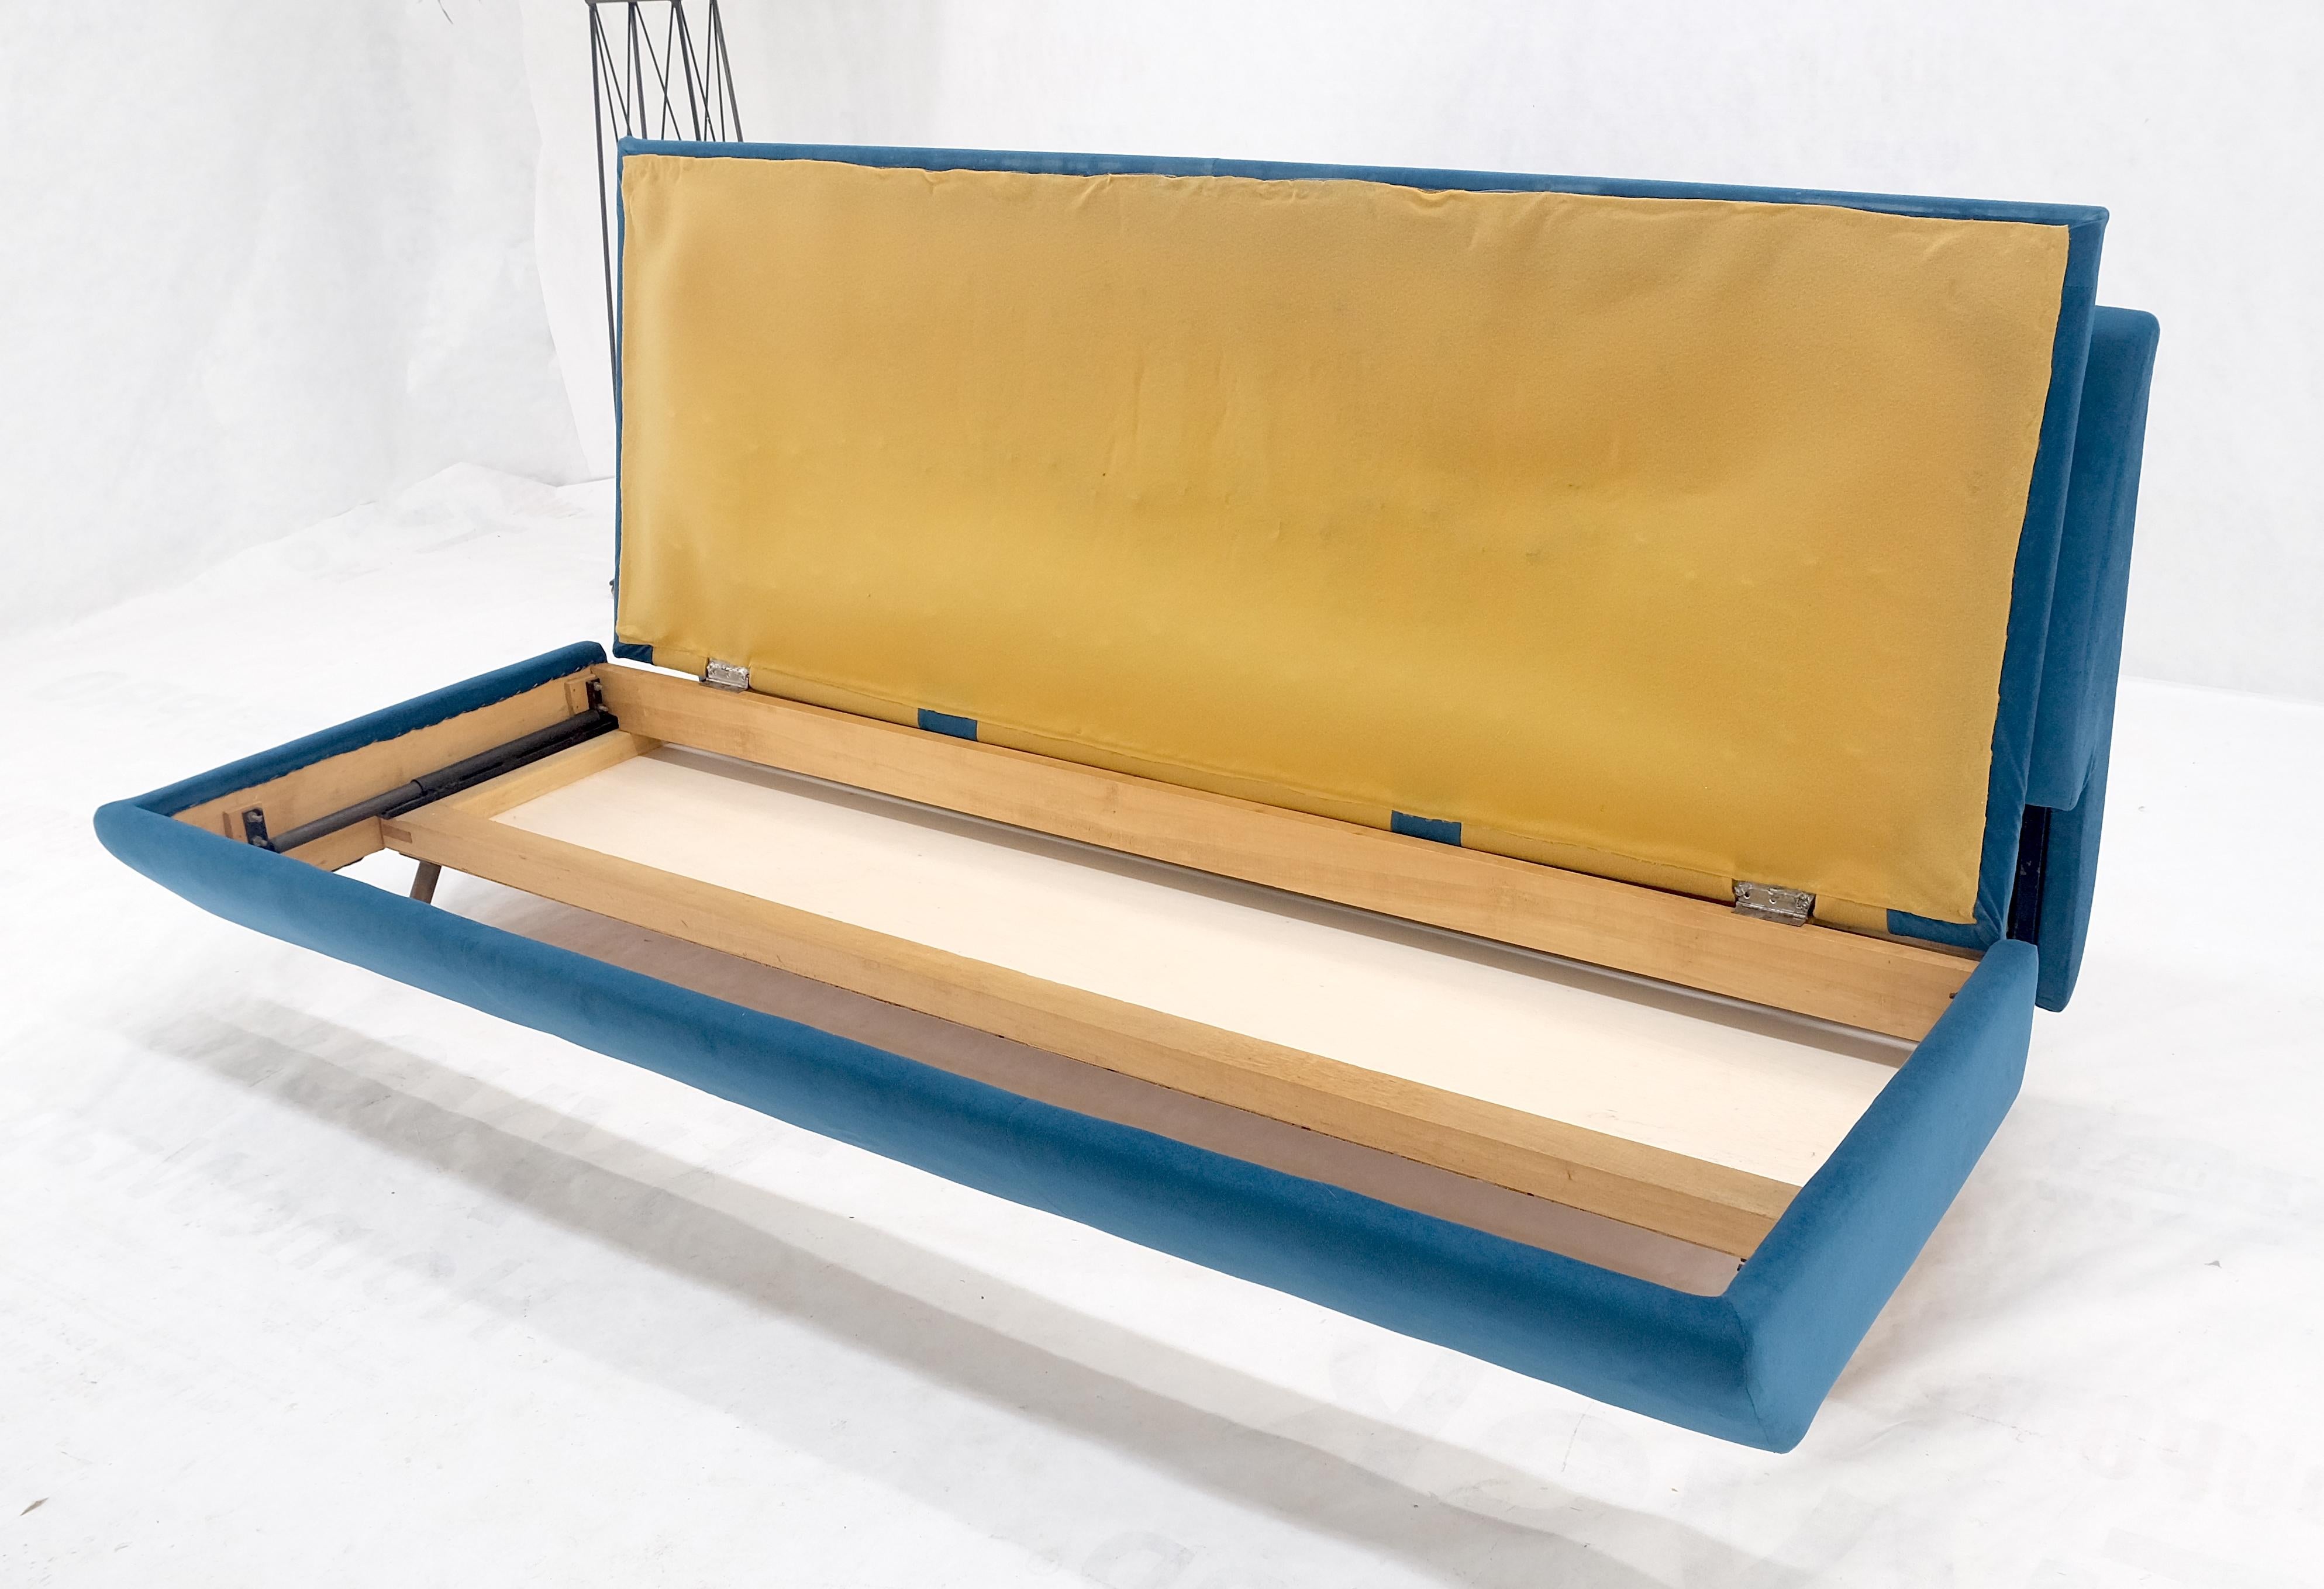 Marco Zanuso Sofa Pull Out Daybed for Arflex Mid Century Italian Modern Teal Upholstery Clean!
seat height: 16